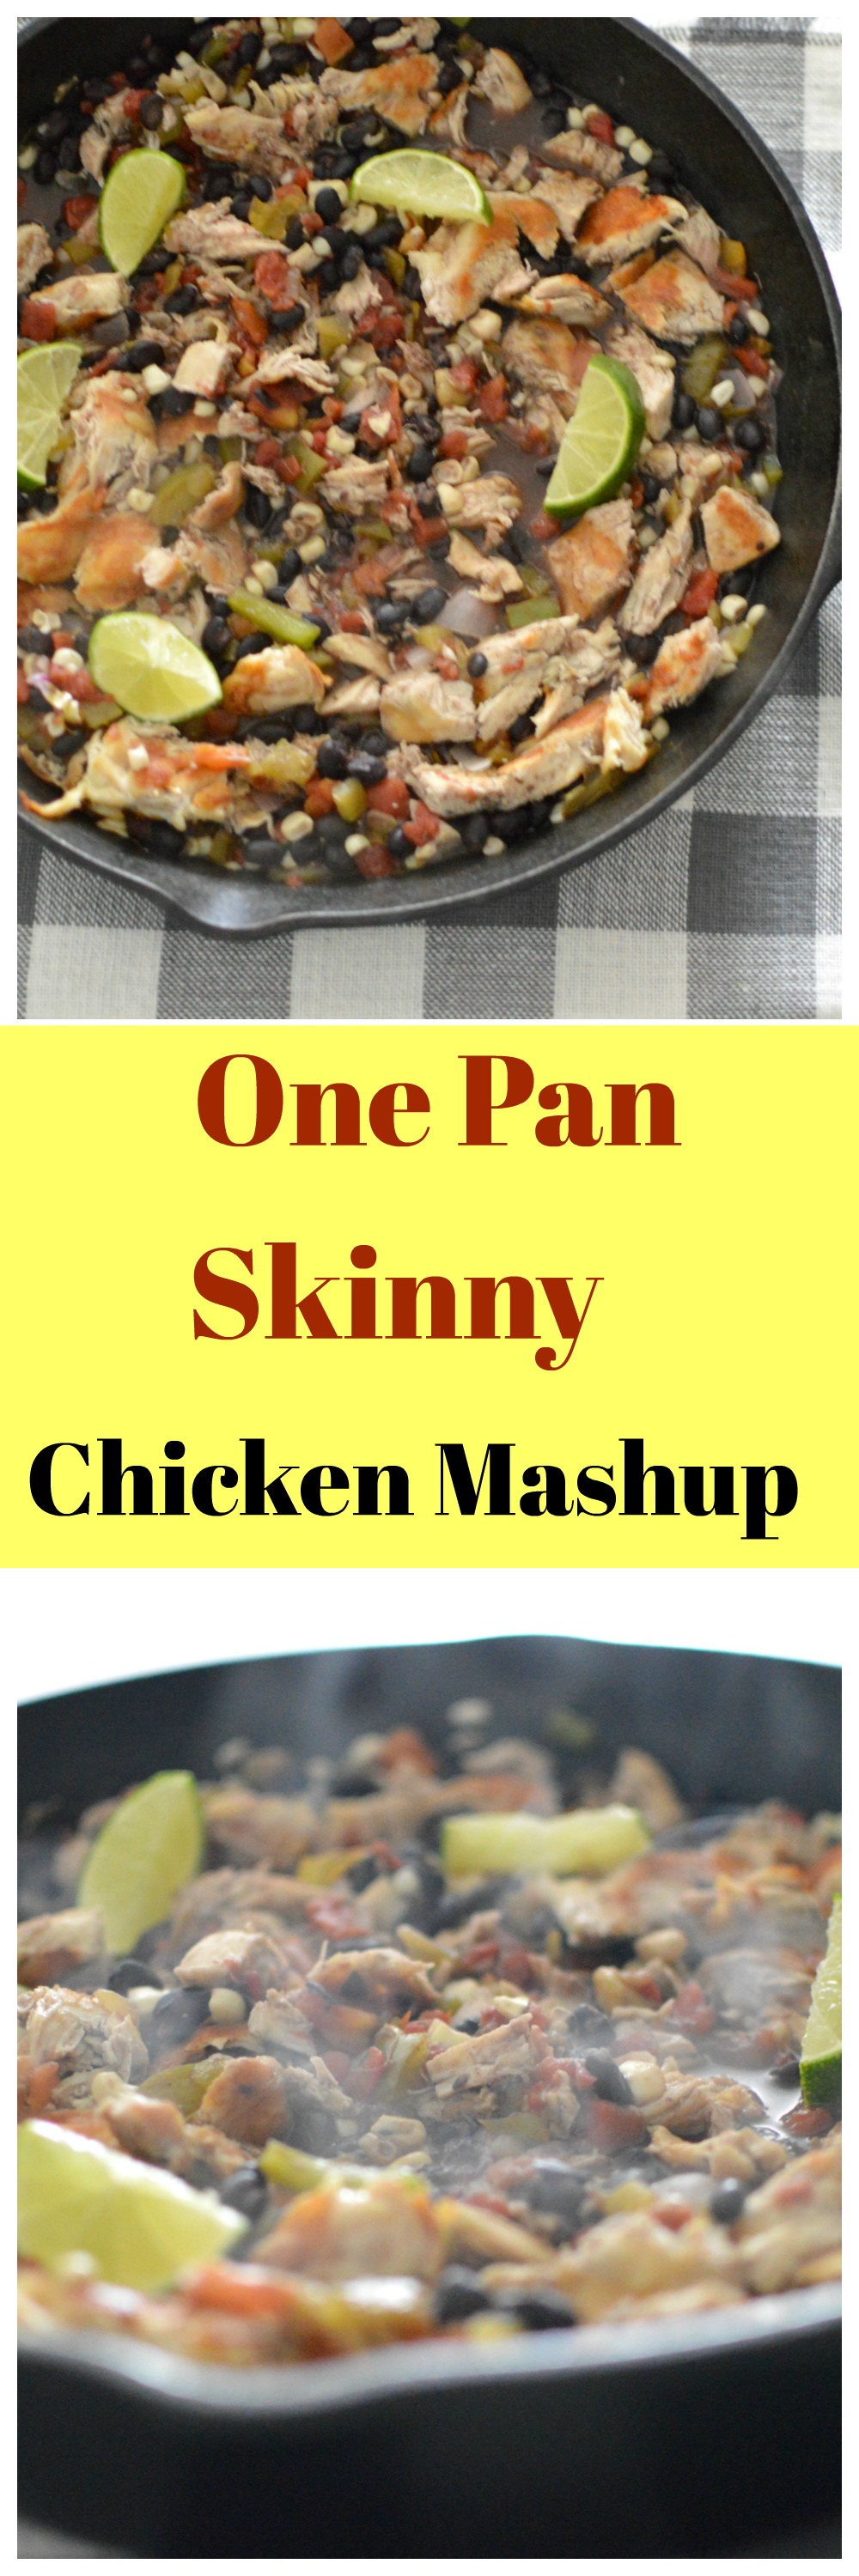 You are going to LOVE this One Pan Skinny Chicken Mashup 😍 which by the way is AMAZING! It is the perfect clean eating meal to add to your weekly meal plan. 